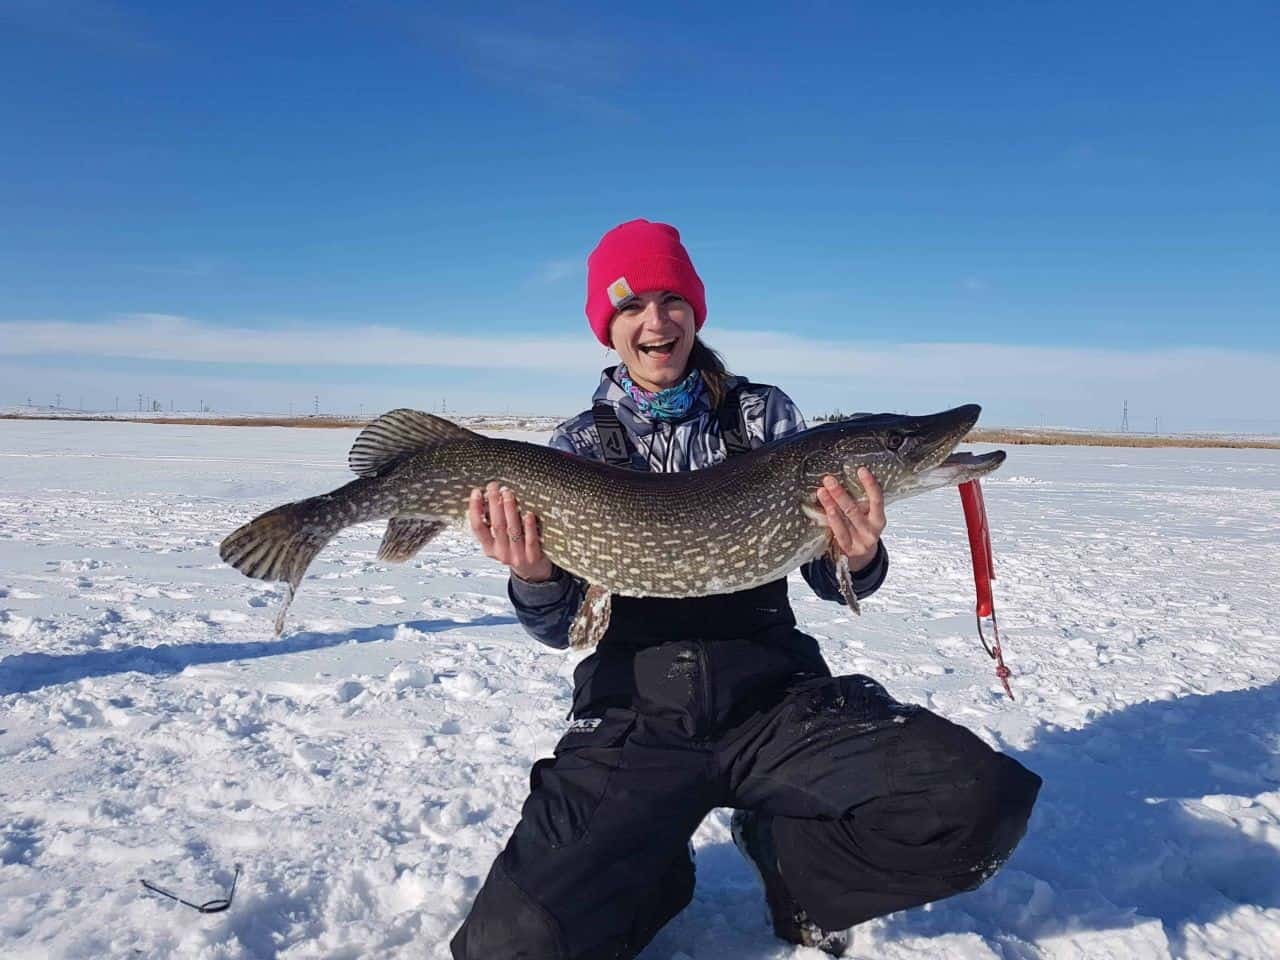 Canada Adventure Seeker and influencer Andrea Horning ice fishing in Canada.